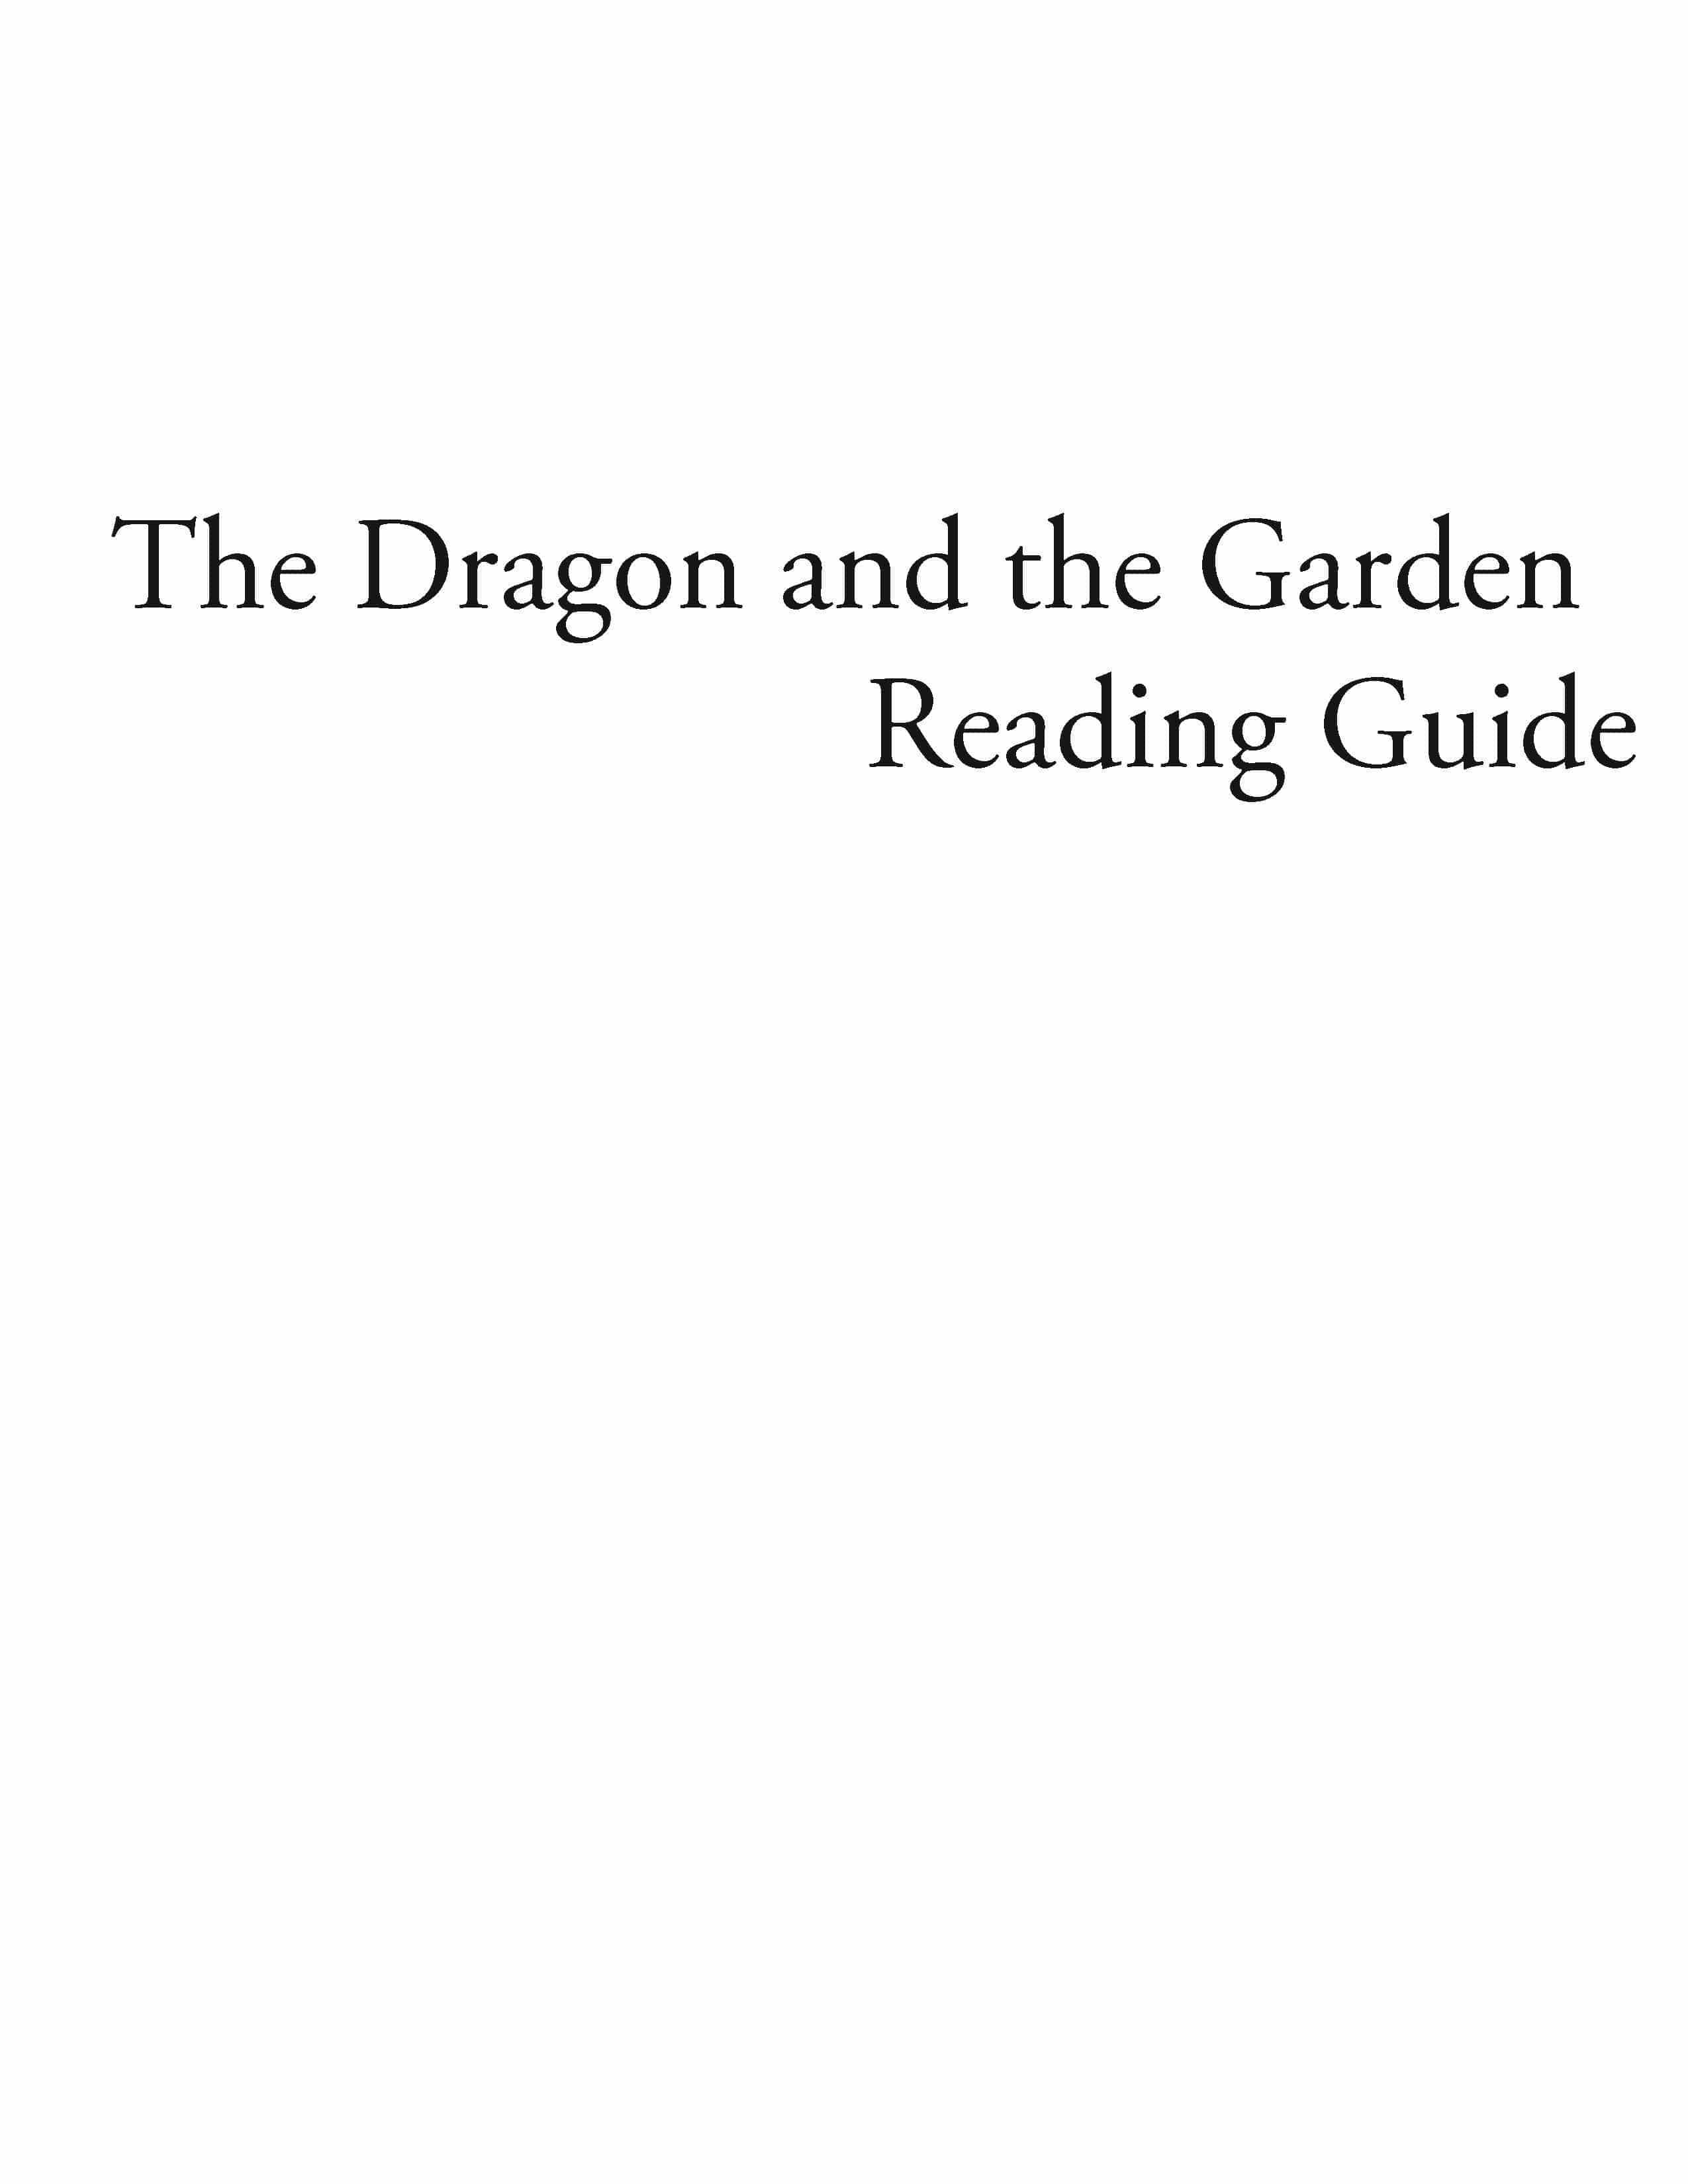 The Dragon in the Garden - Reading Guide (Download)